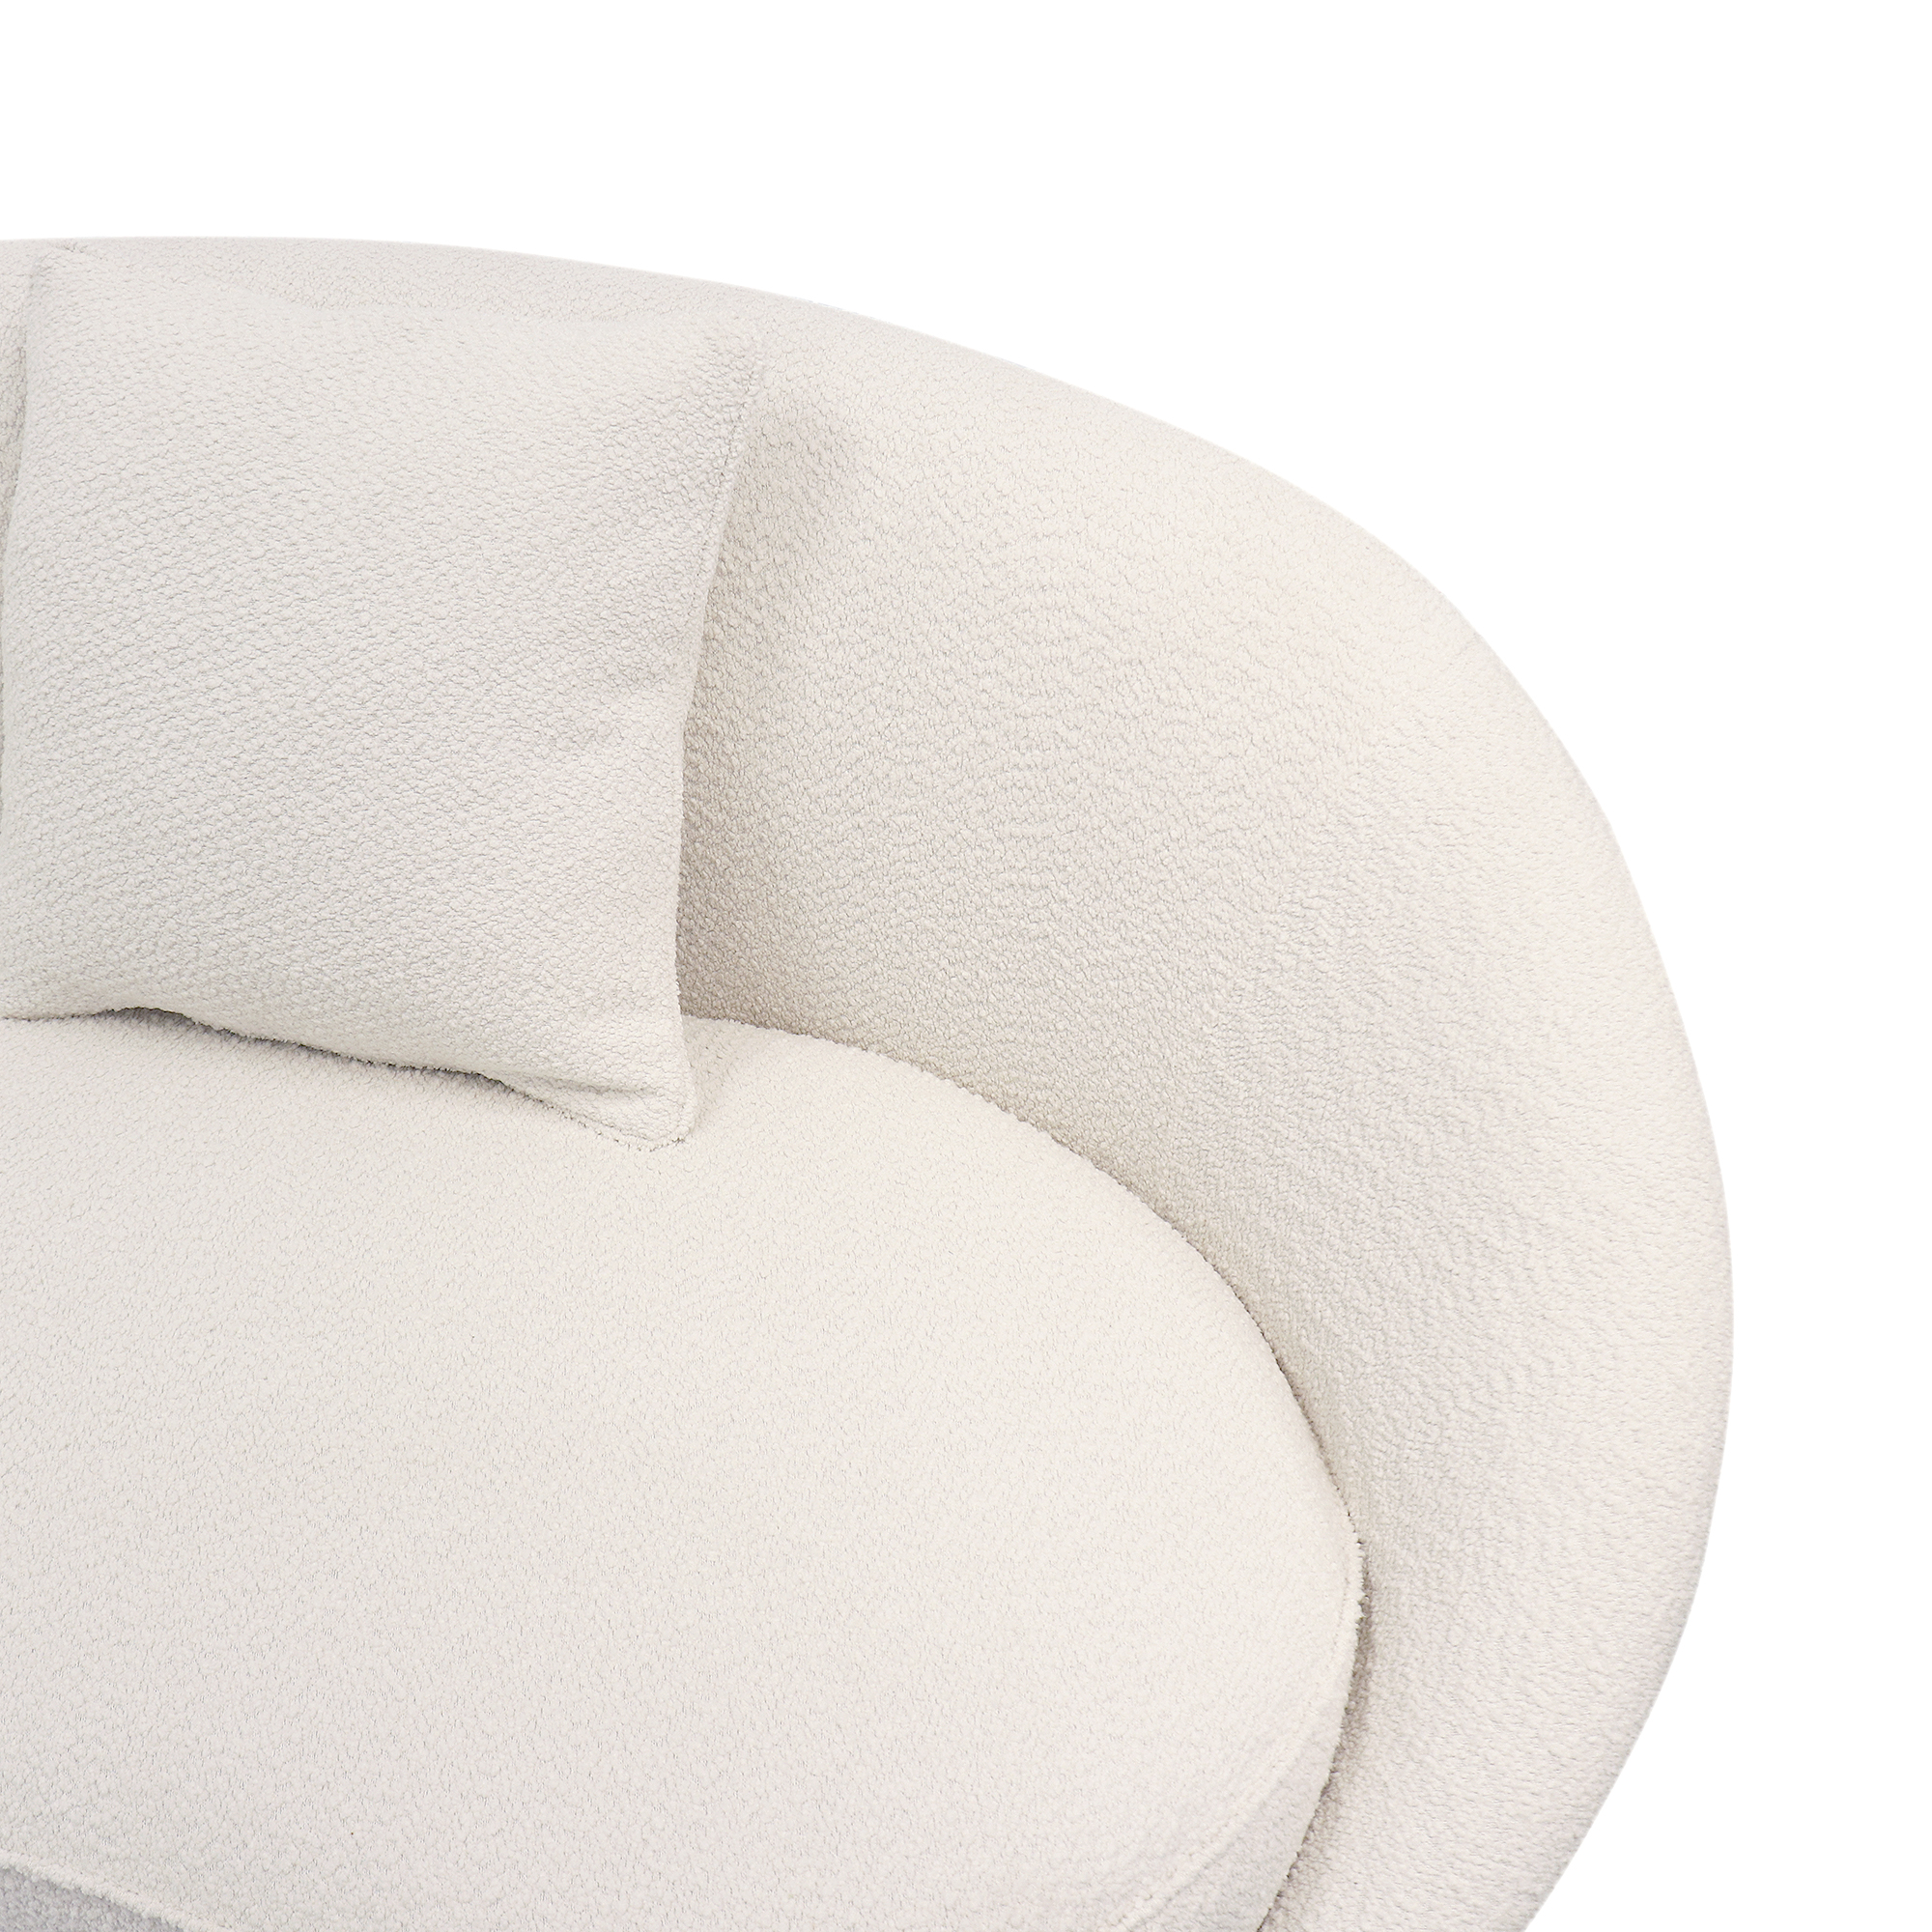 Pasargad Home Luna Collection Textured Fabric Curved Sofa, Ivory - image 2 of 10